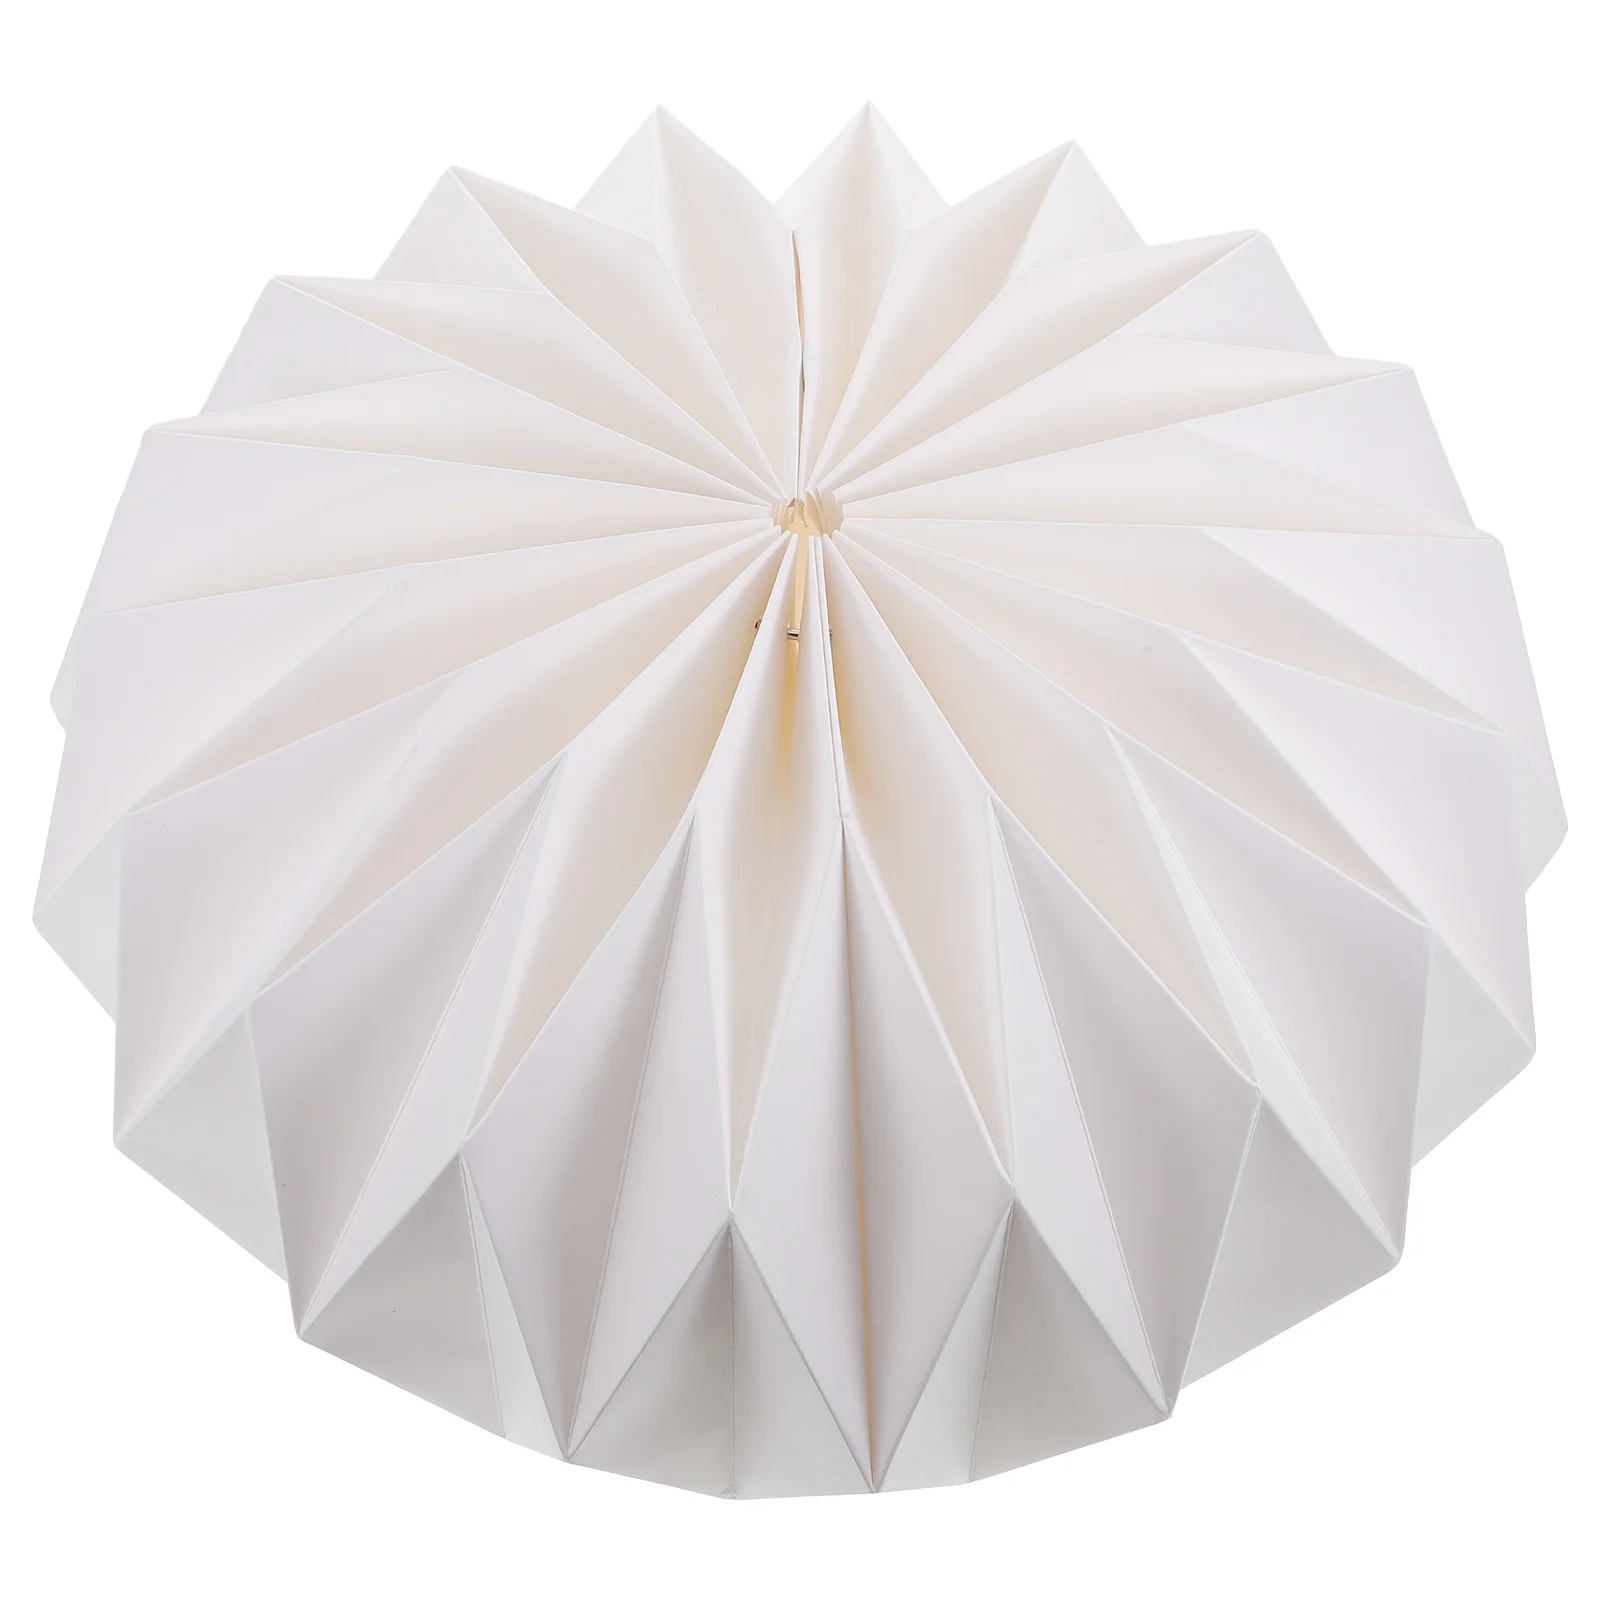 Modern minimalist origami Lampshade Cover Paper Lamp Pleated Hanging Origami Simple Style Light Accessory Decoration jehovah s witnesses best life ever jw ministry pioneer shower curtain for shower modern accessory bathrooms curtain